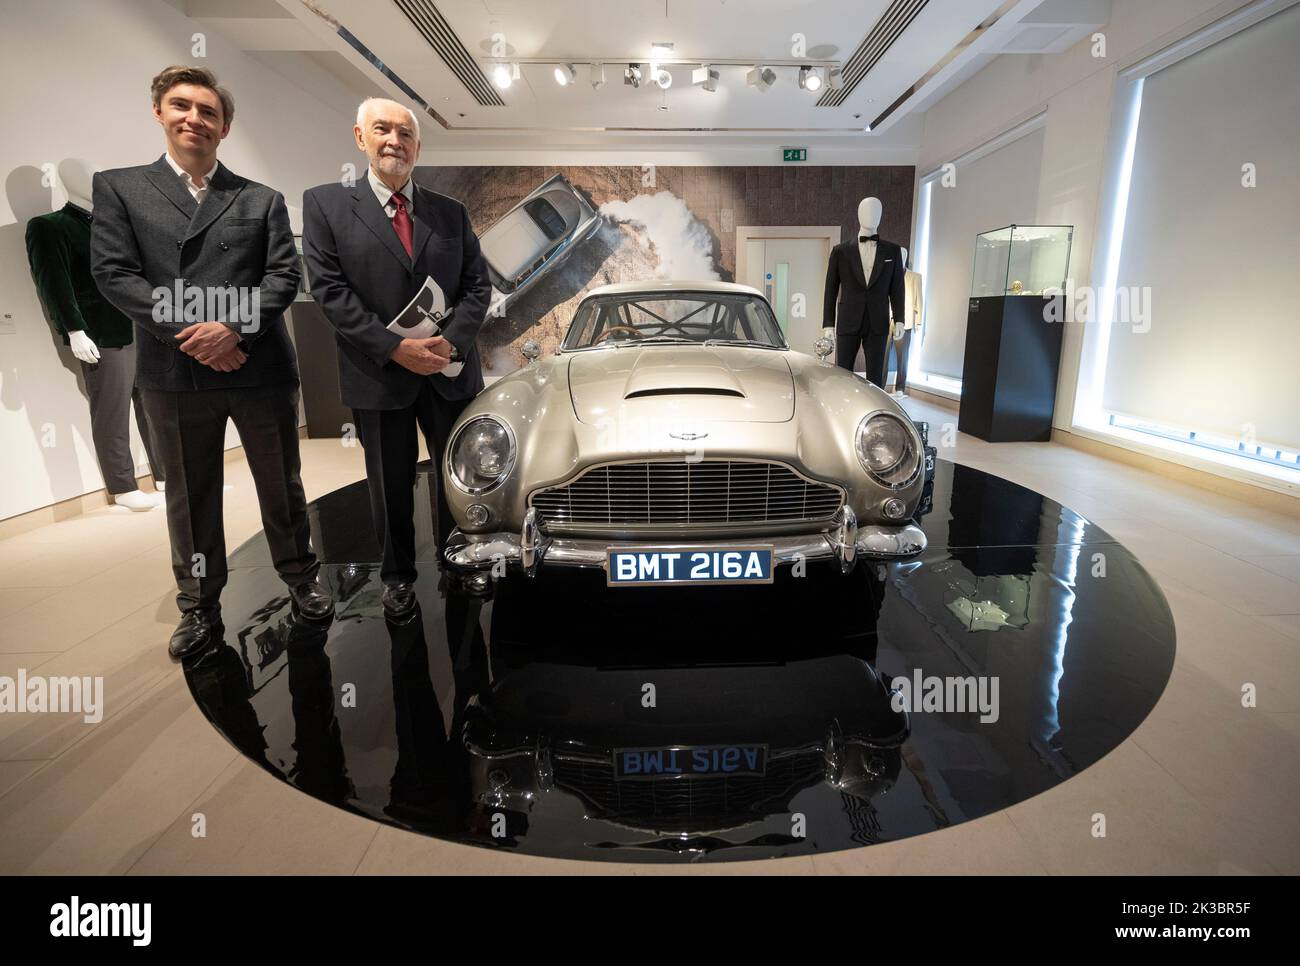 Embargoed till 11.00am, 26.9.22.  Christies, London, UK. 26 September 2022. Christie’s and EON Productions present 60 Years of James Bond, an official two-part charity sale celebrating the 60th Anniversary of James Bond on the silver screen. Featuring 60 iconic lots spanning the 25 Bond films, proceeds from the live and online auctions will be donated to benefit 45 charities. Image: Aston Martin DB5 stunt car from No Time To Die with Bond Producer Michael G Wilson and Associate Producer Gregg Wilson. Credit: Malcolm Park/Alamy Live News Stock Photo